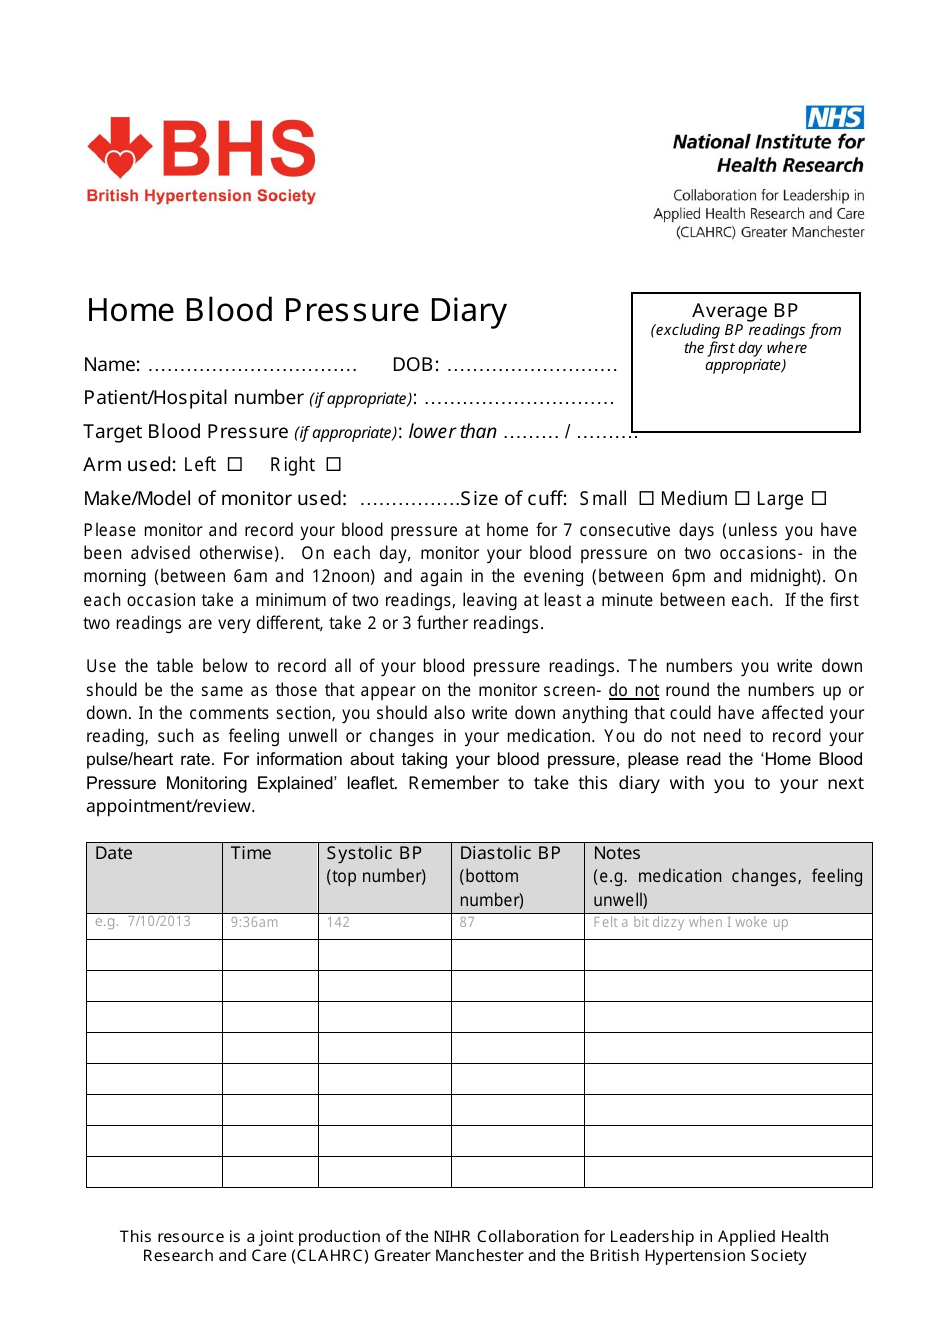 Home Blood Pressure Diary - British Hypertension Society - United Kingdom, Page 1